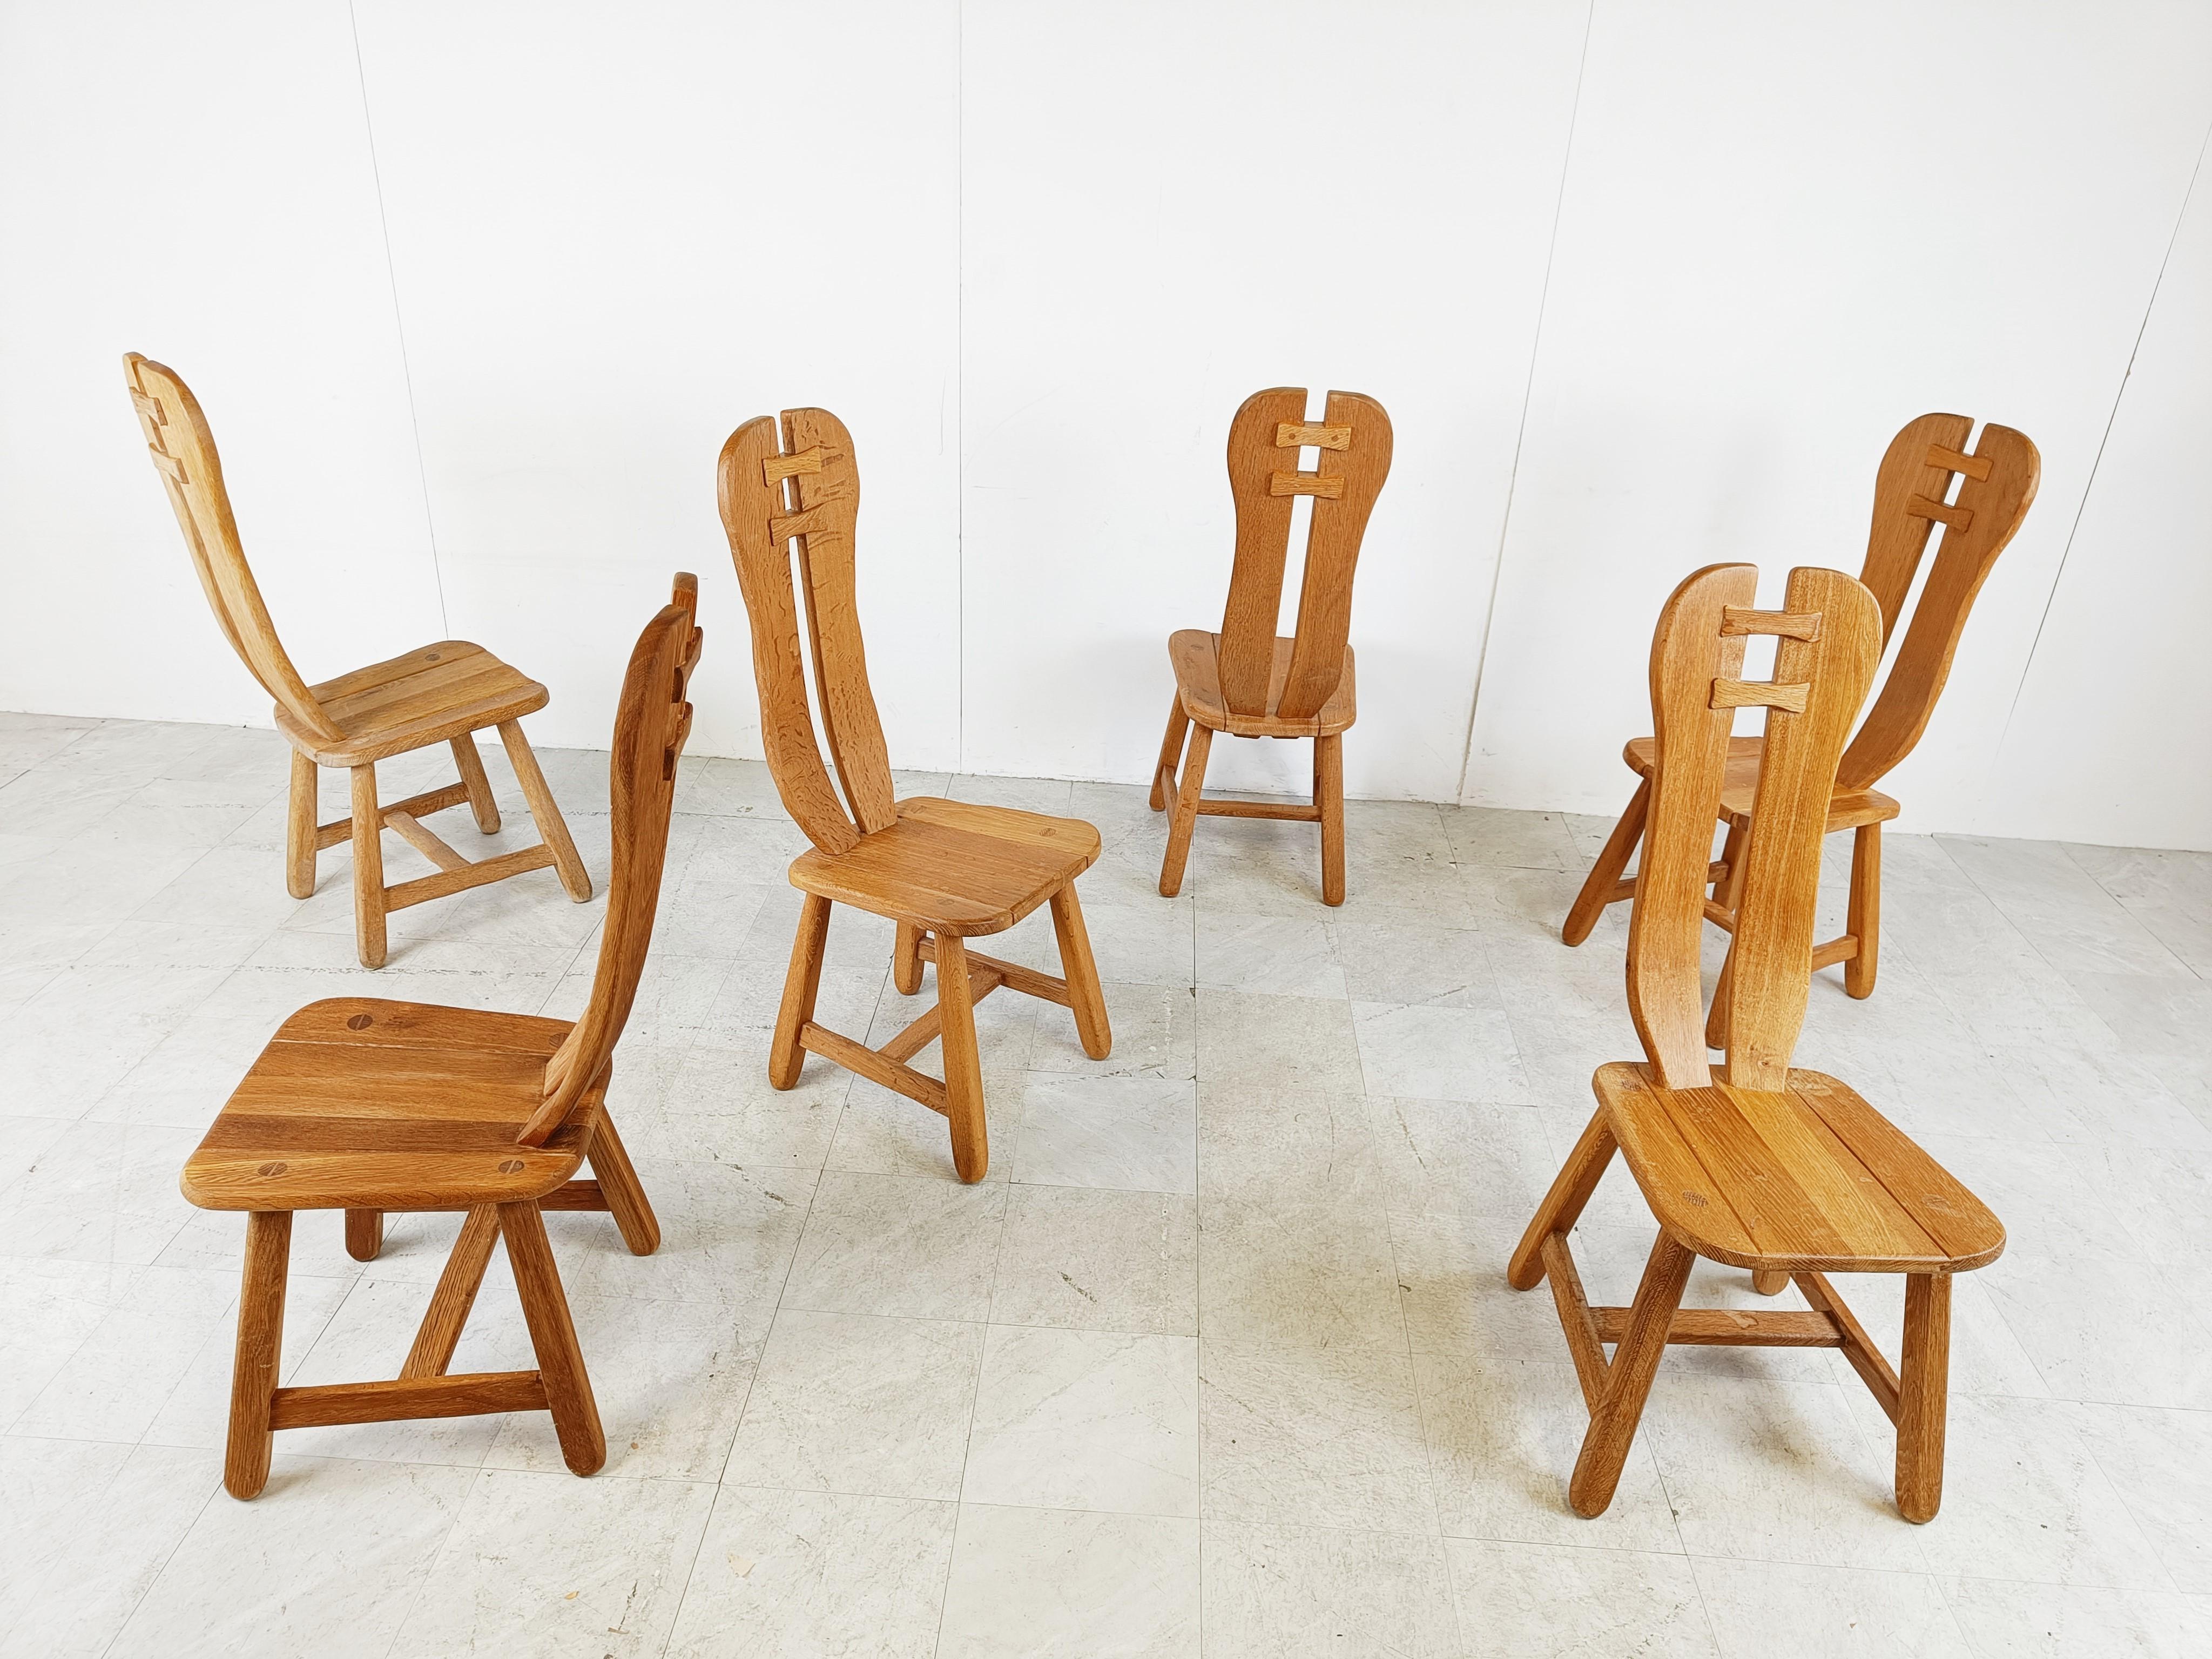 Vintage Dining Chairs by Depuydt, Belgium, 1960s For Sale 1